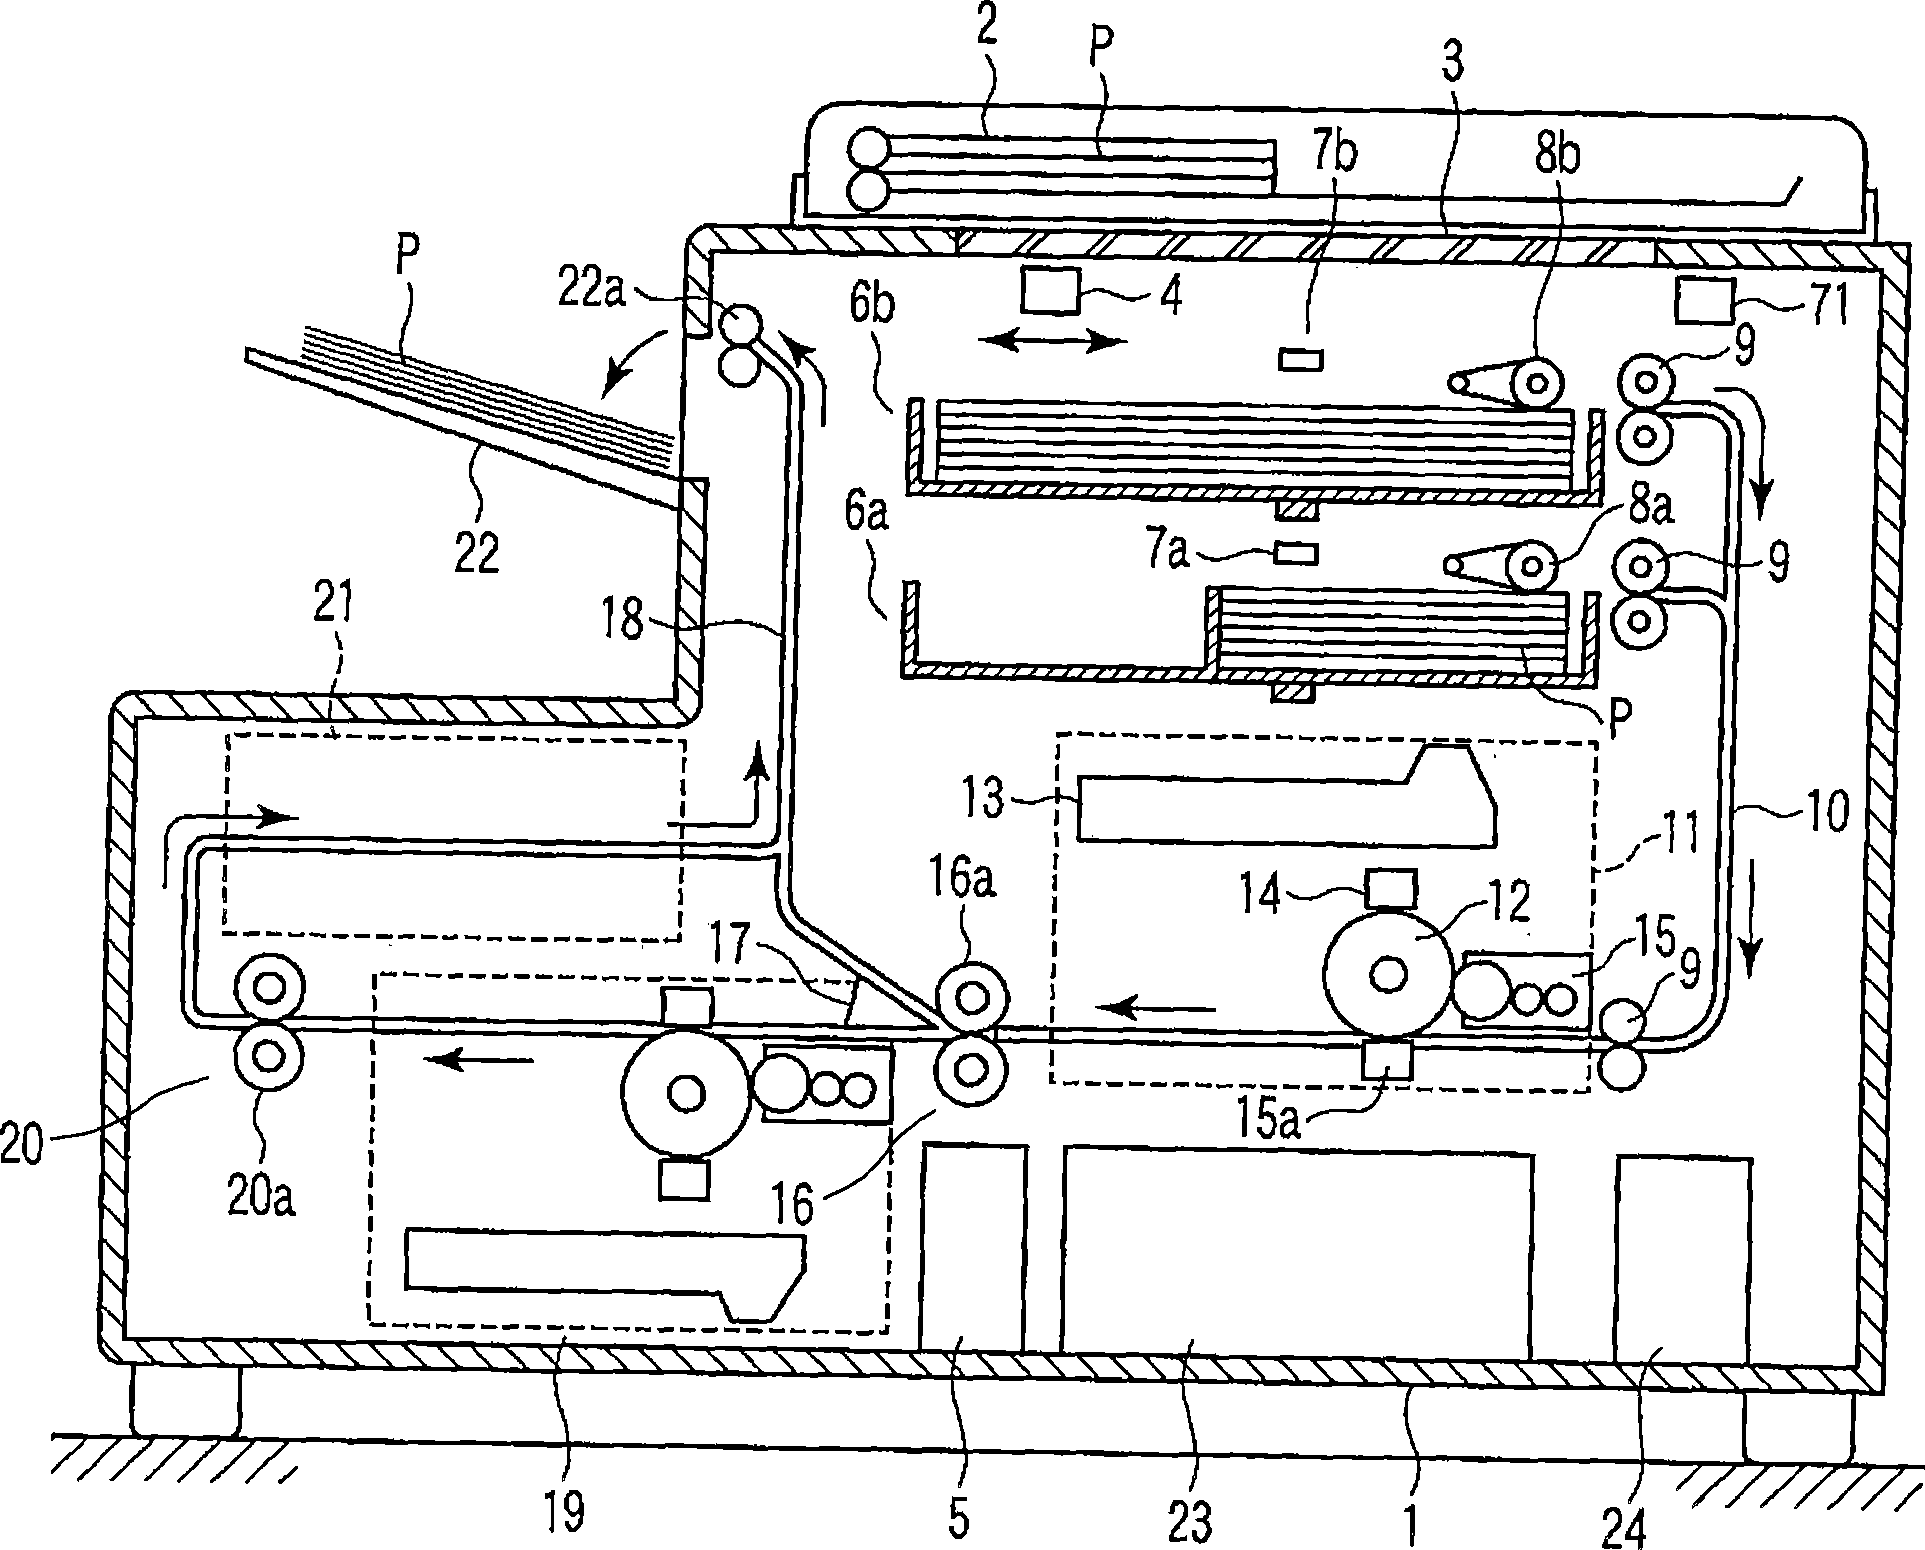 Folding roller of paper processing apparatus